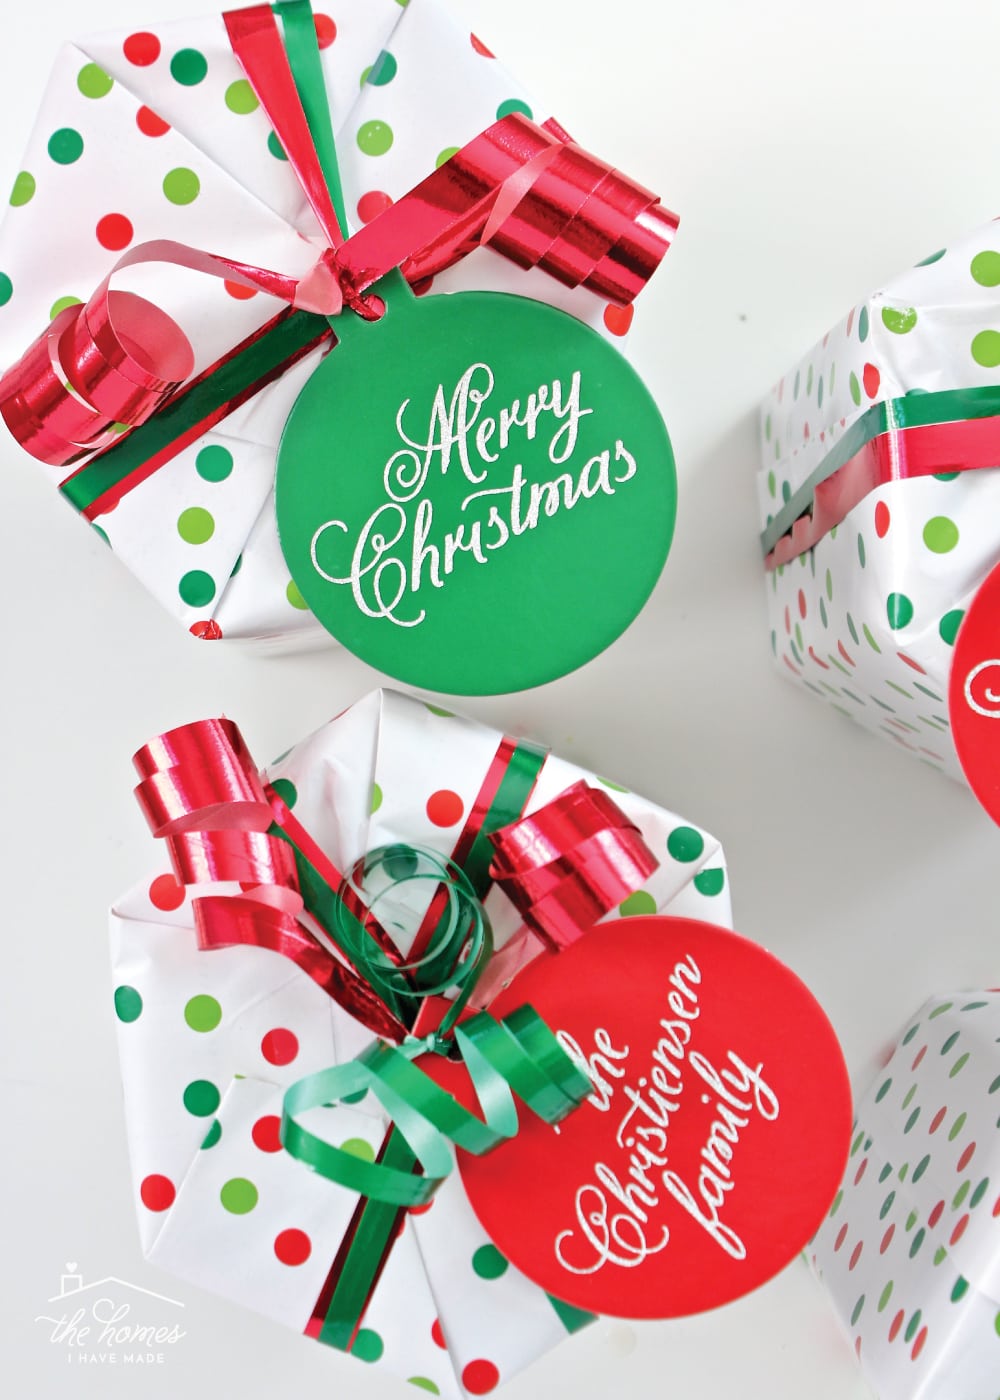 Looking for a quick, easy yet special gift for neighbors, teachers, co-workers and more? Check out this super easy personalized gift idea for anyone on your list!